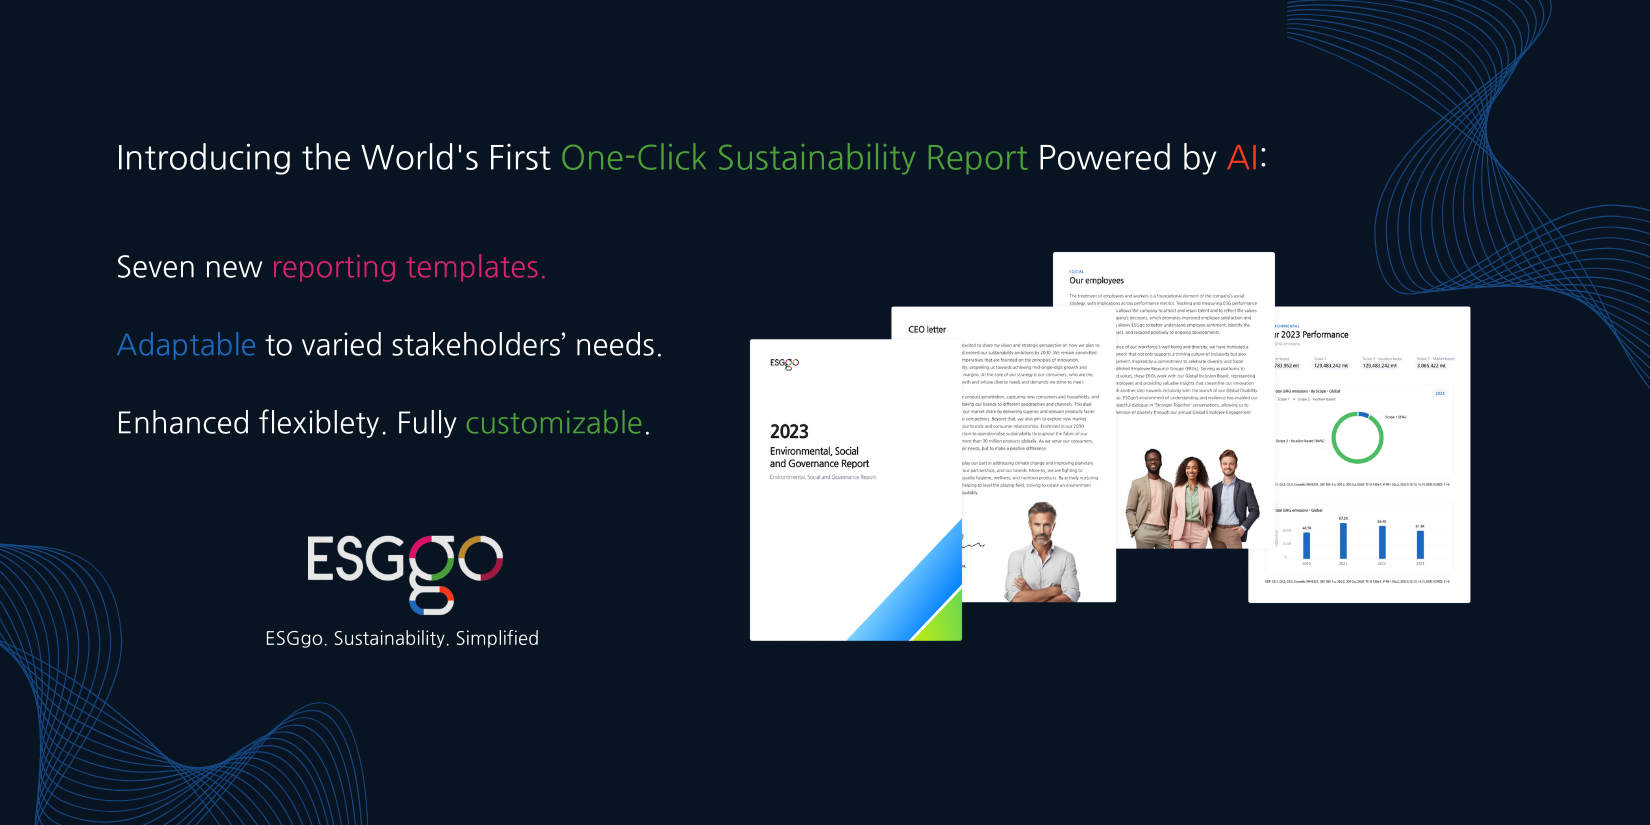 ESGgo Unveils World’s First One-Click Sustainability Report, Powered by AI, with Different Reporting Templates for Different Use Cases